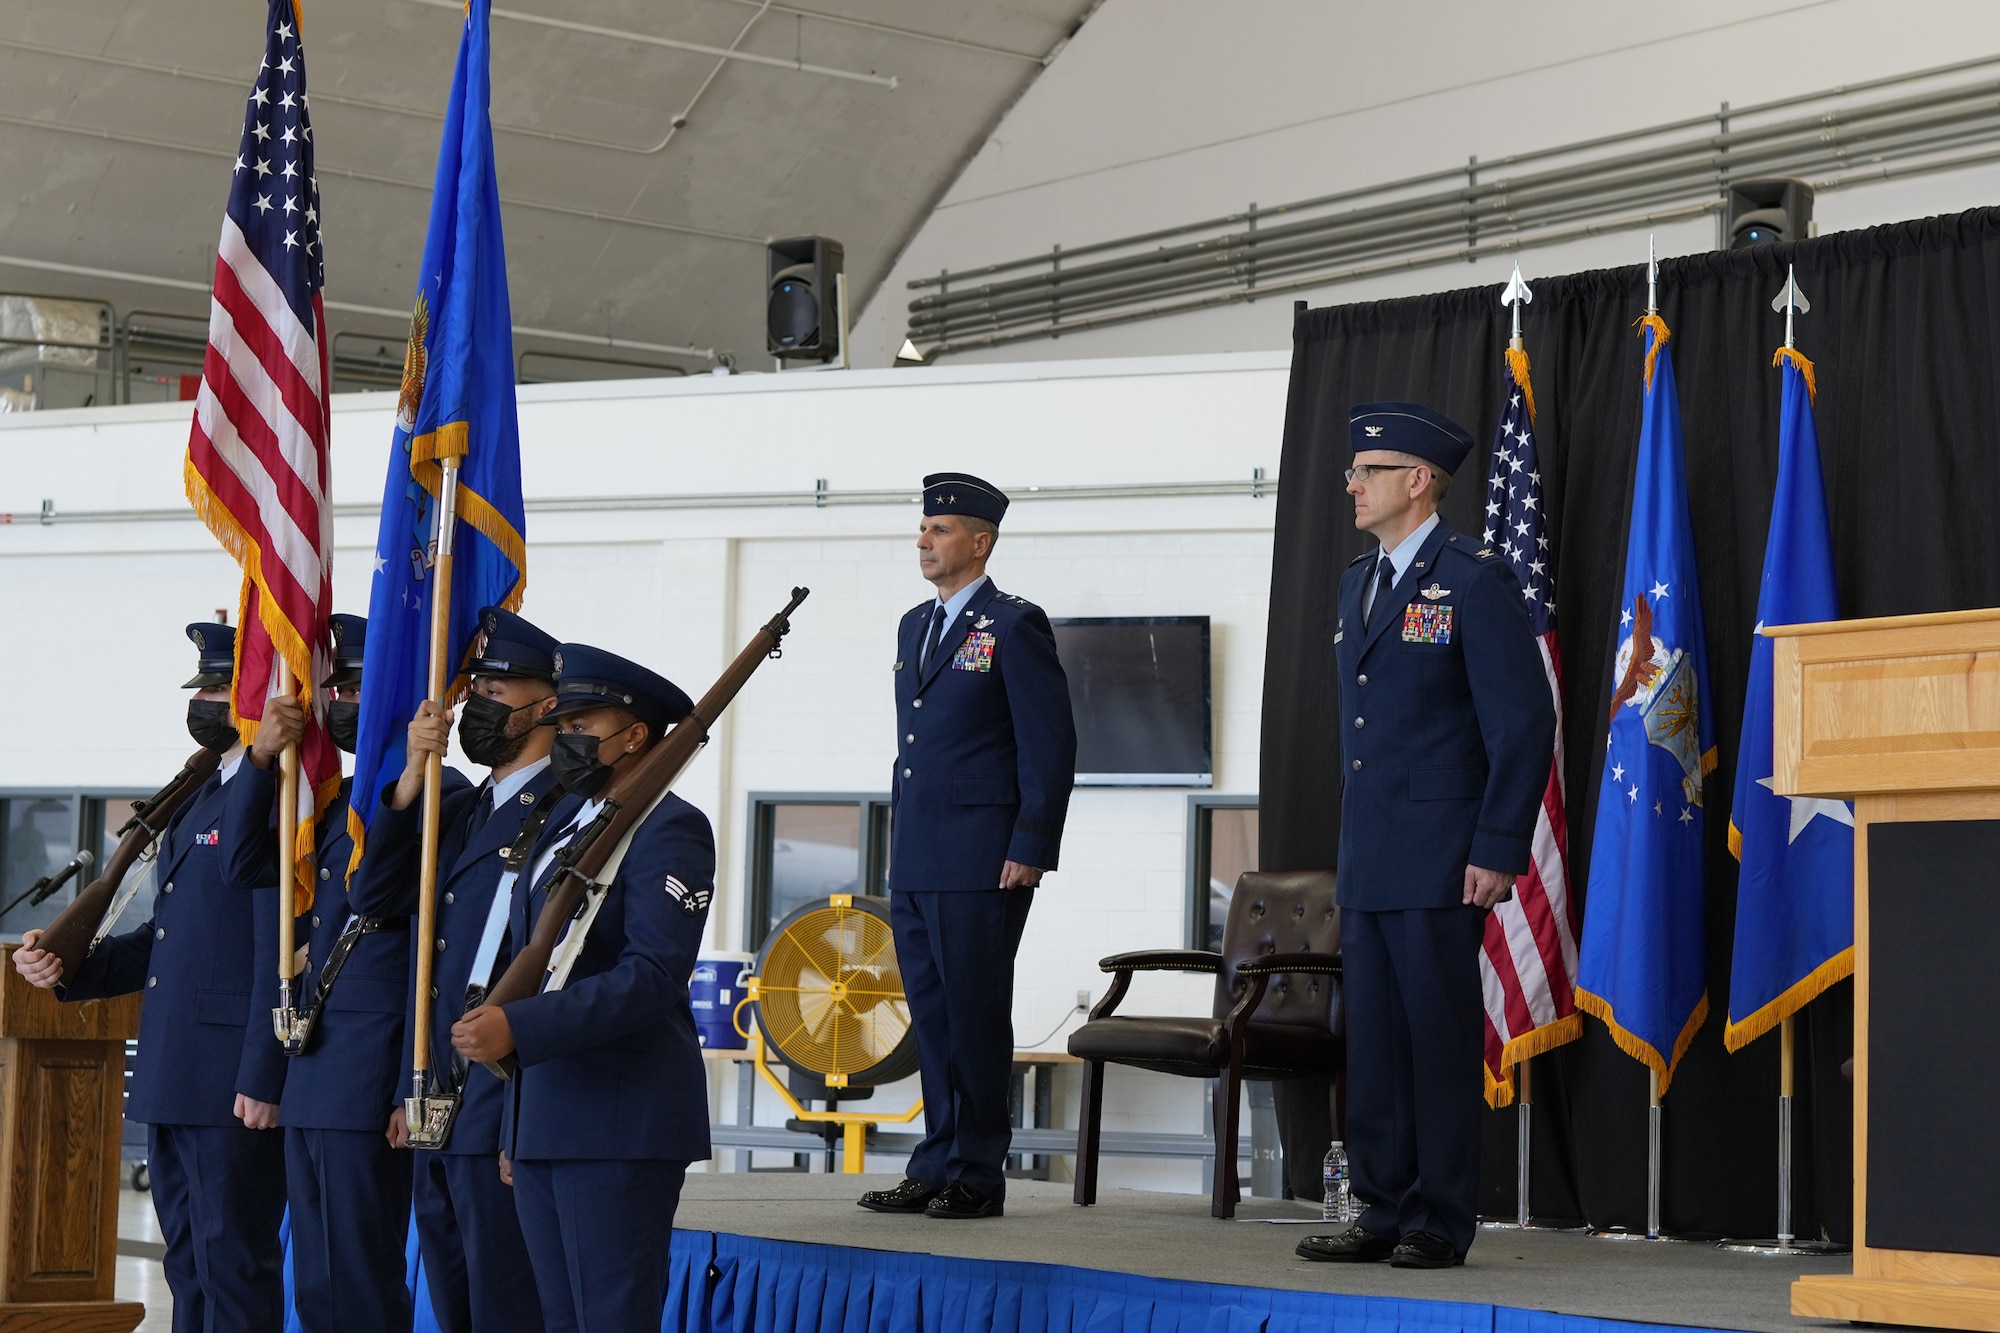 Members of the 459th Air Refueling Wing Honor Guard present the colors during a change of command ceremony, June 6, 2021, at Joint Base Andrews, Md. The honor guard is currently looking to recruit new Airmen to join its organization. (U.S. Air Force photo by Tech Sgt. Brent Skeen)